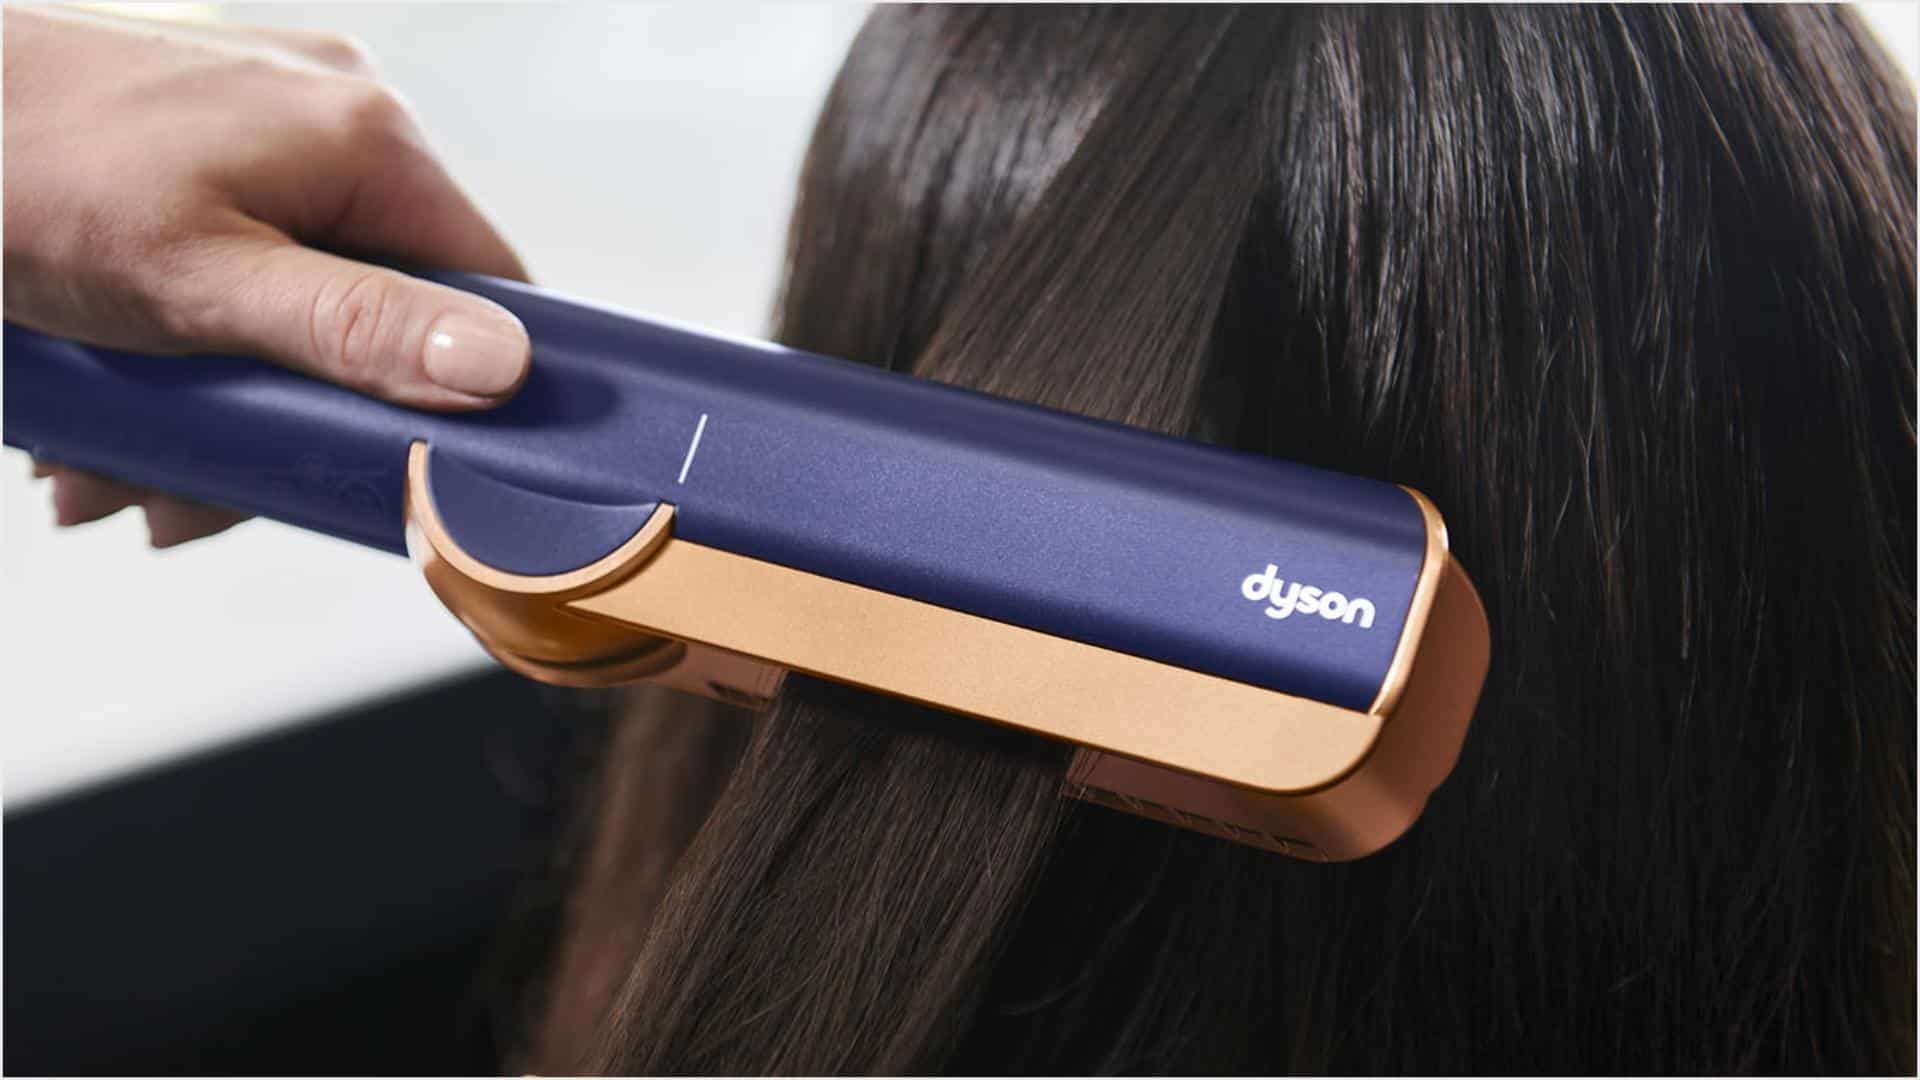 Dyson Airstrait straightener launched in India at Rs 45,900: Features, specifications, and other details